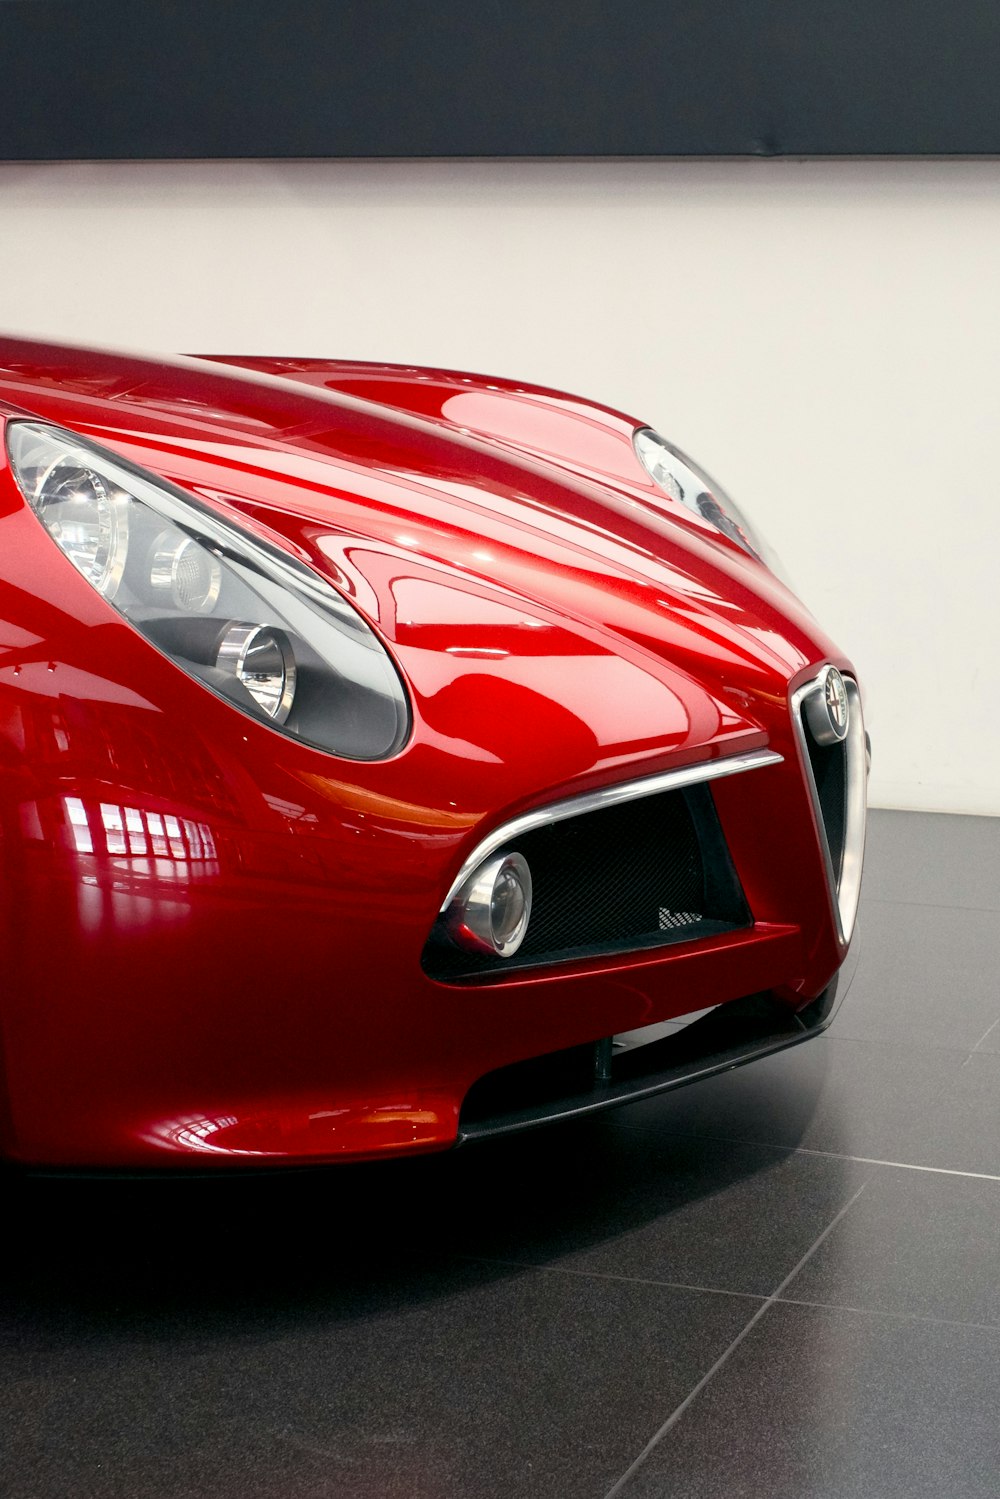 a close up of a red sports car on a tile floor